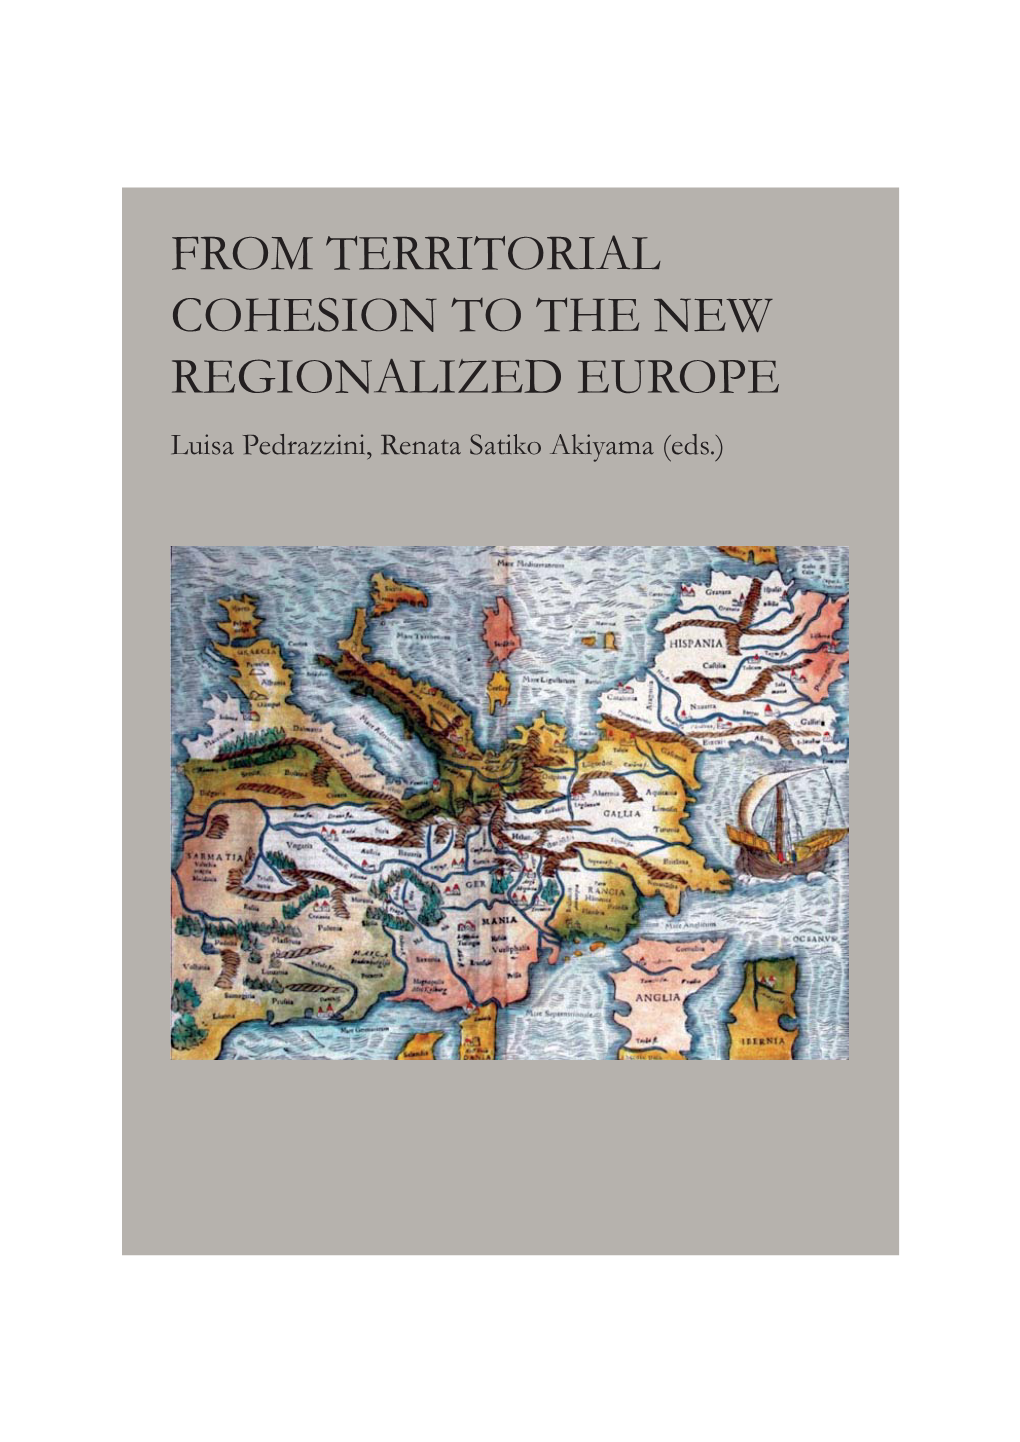 From Territorial Cohesion to the New Regionalized Europe